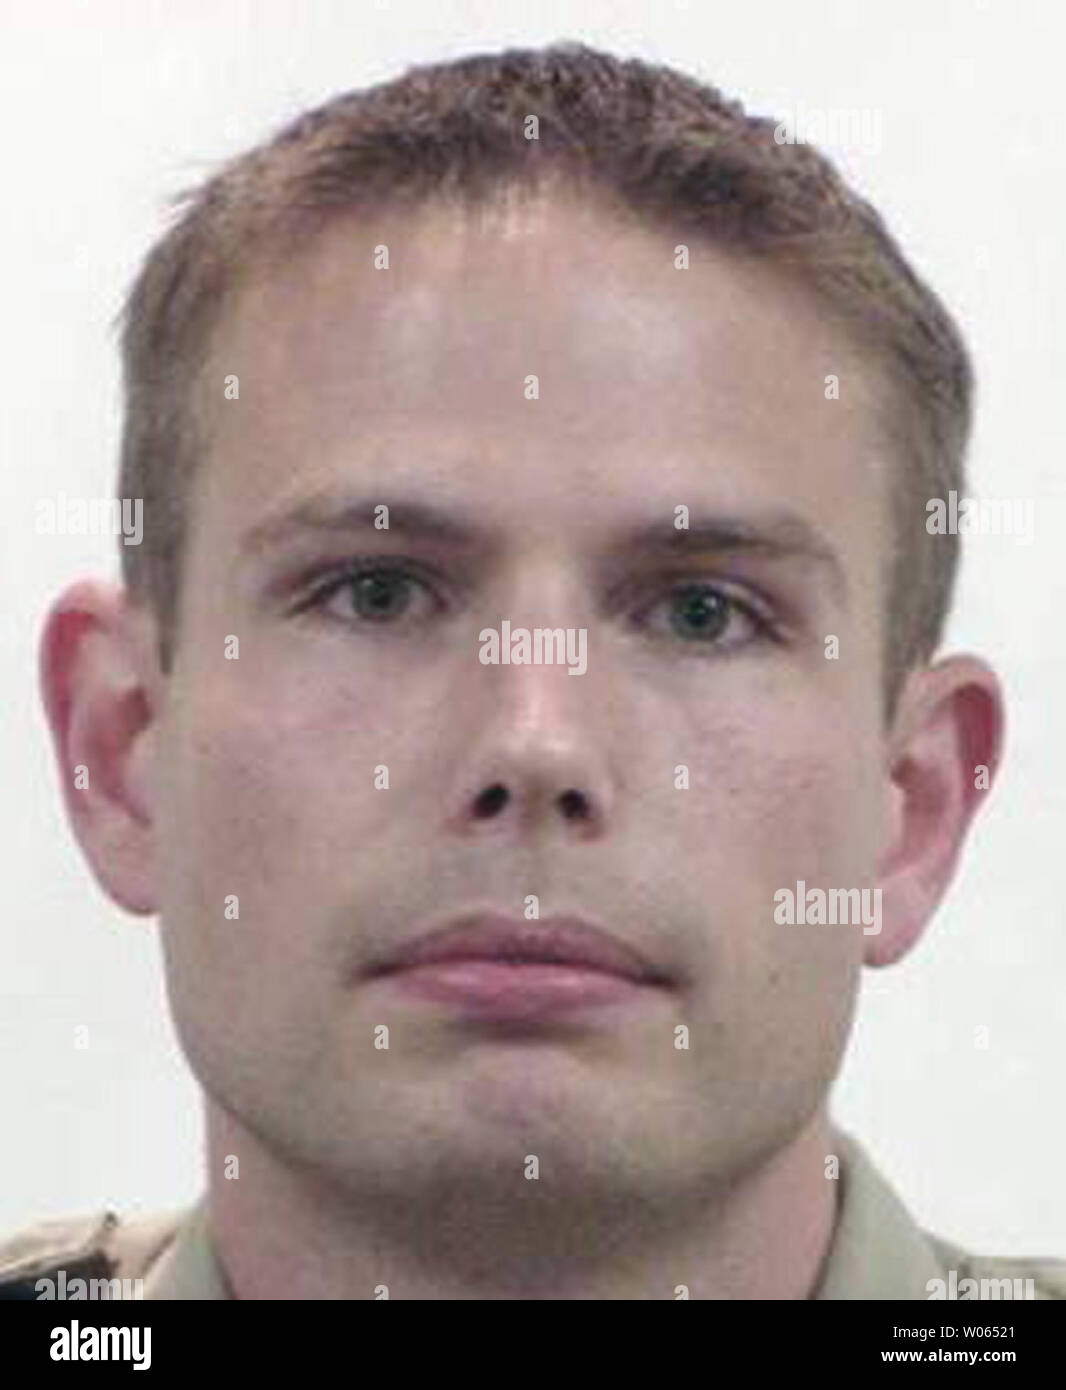 Lincoln County, Missouri Deputy Nicholas Forler, 26, was charged with two counts of involuntary manslaughter on February 3, 2006 for killing two men following a traffic stop in October 2005. The charges allege that Forler recklessly caused the deaths of Michael Brown, 23, of Troy ,Mo and Tyler Teasley, 22, of Silex, MO. The shooting occured when Forler tried to pull over a speeding pickup truck driven by Tealey near Troy, MO about 60 miles north of St. Louis.  When the deputy finally stopped and approached the truck, the vehicle began to roll backwards. Fearing for his safety, the deputy fired Stock Photo